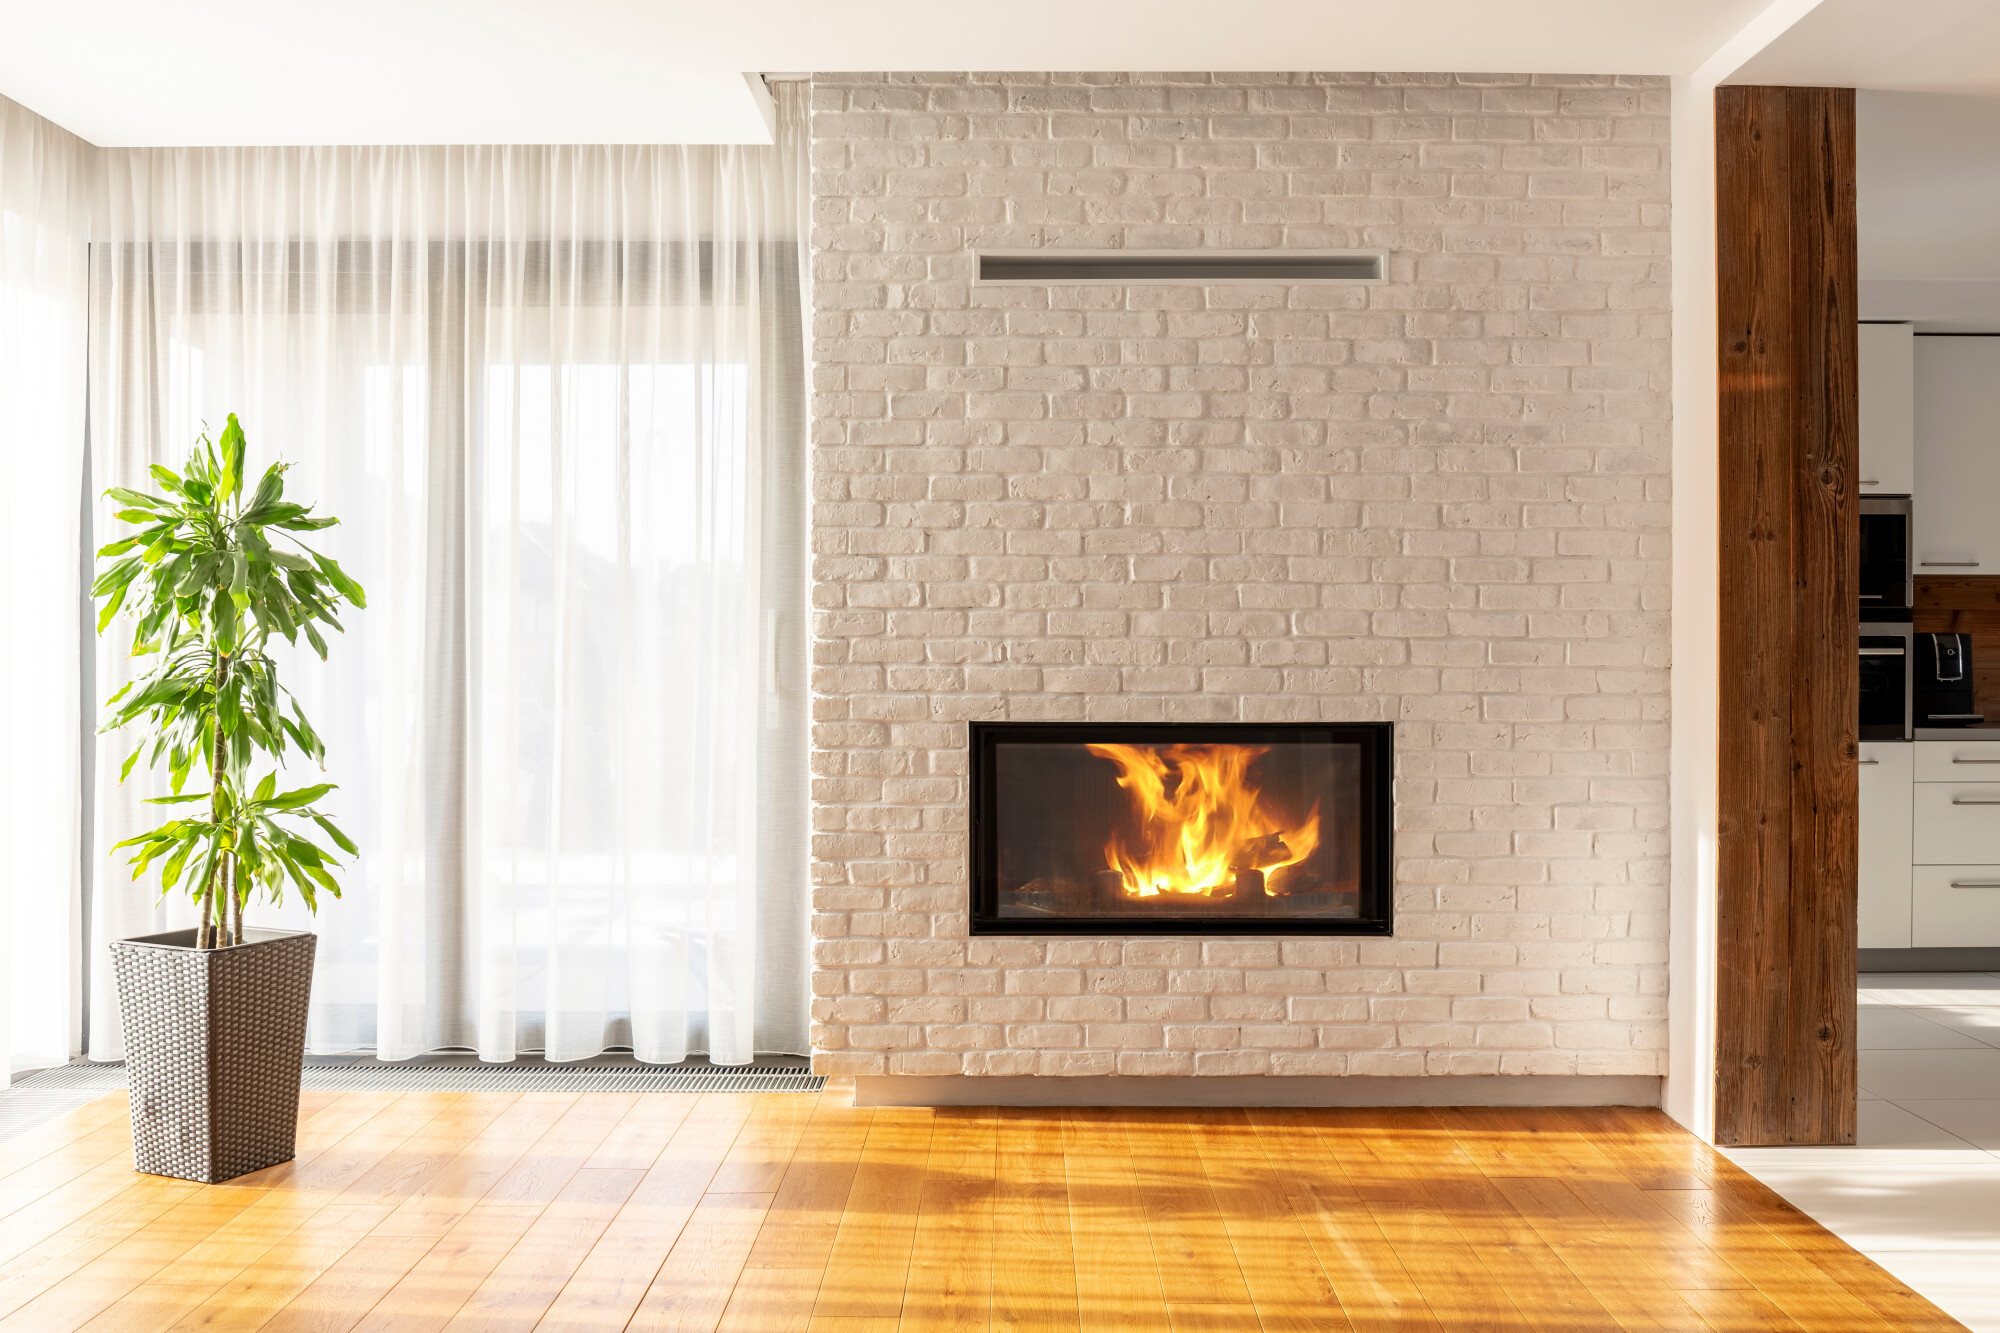 Fireplace,On,Brick,Wall,In,Bright,Living,Room,Interior,Of